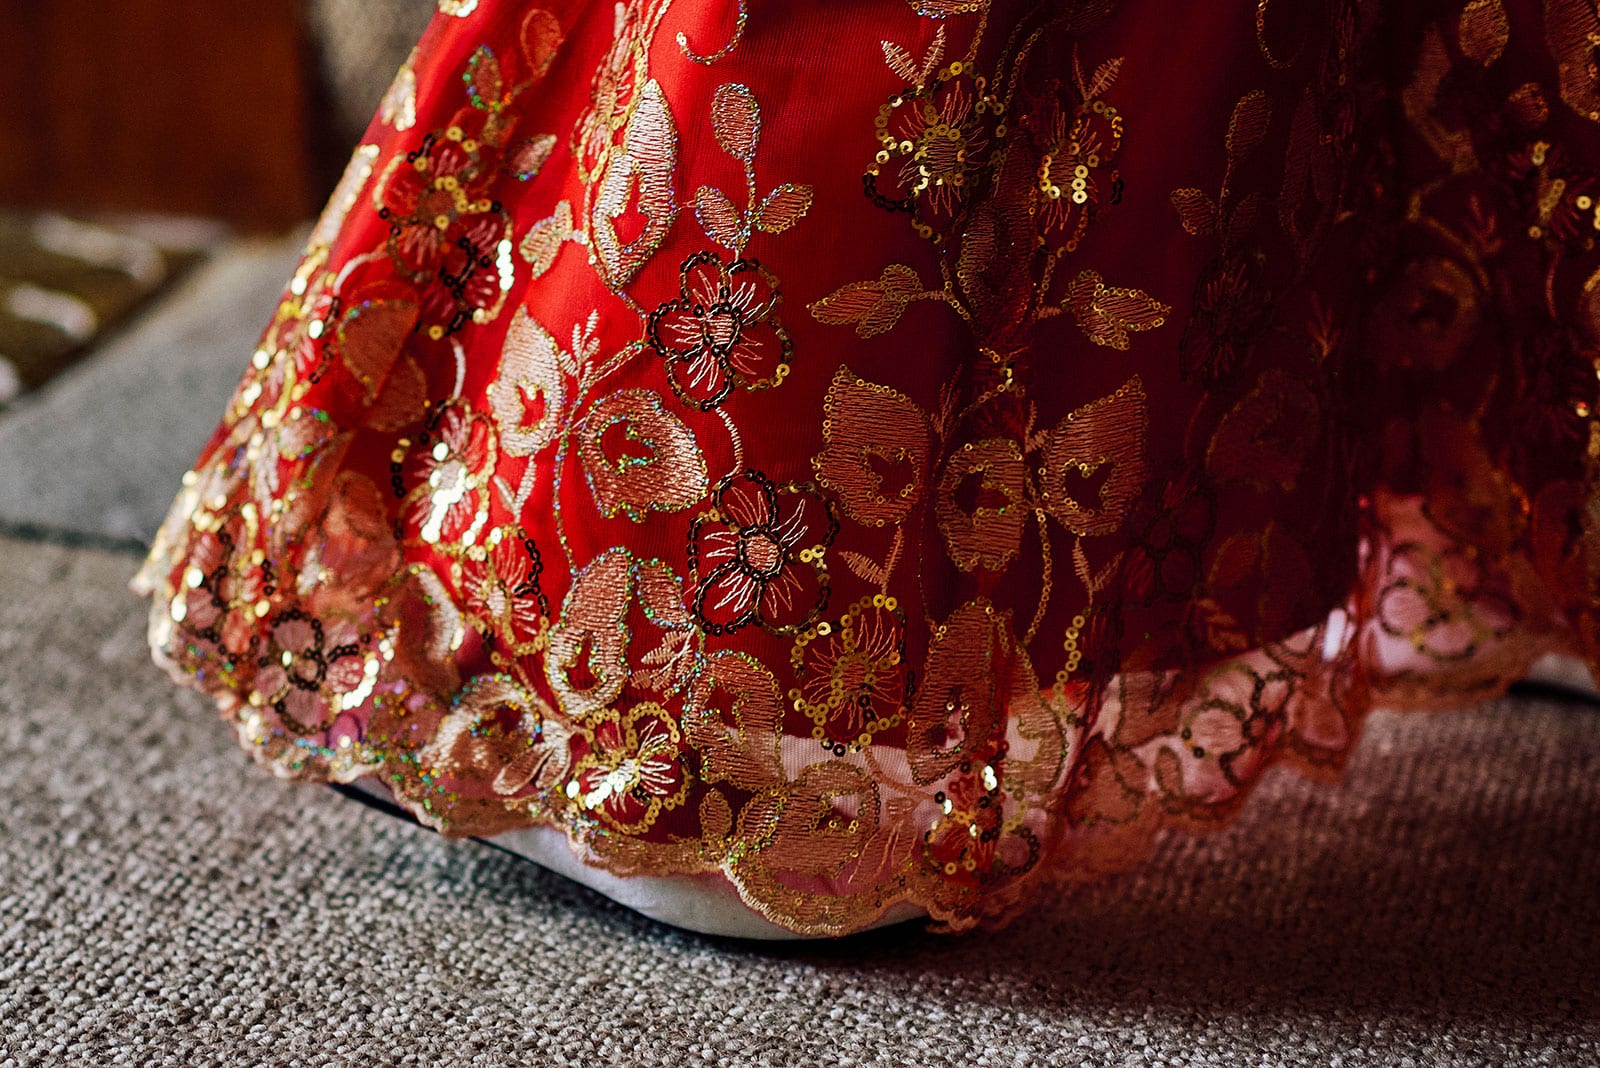 the fine detail on bride's red dress